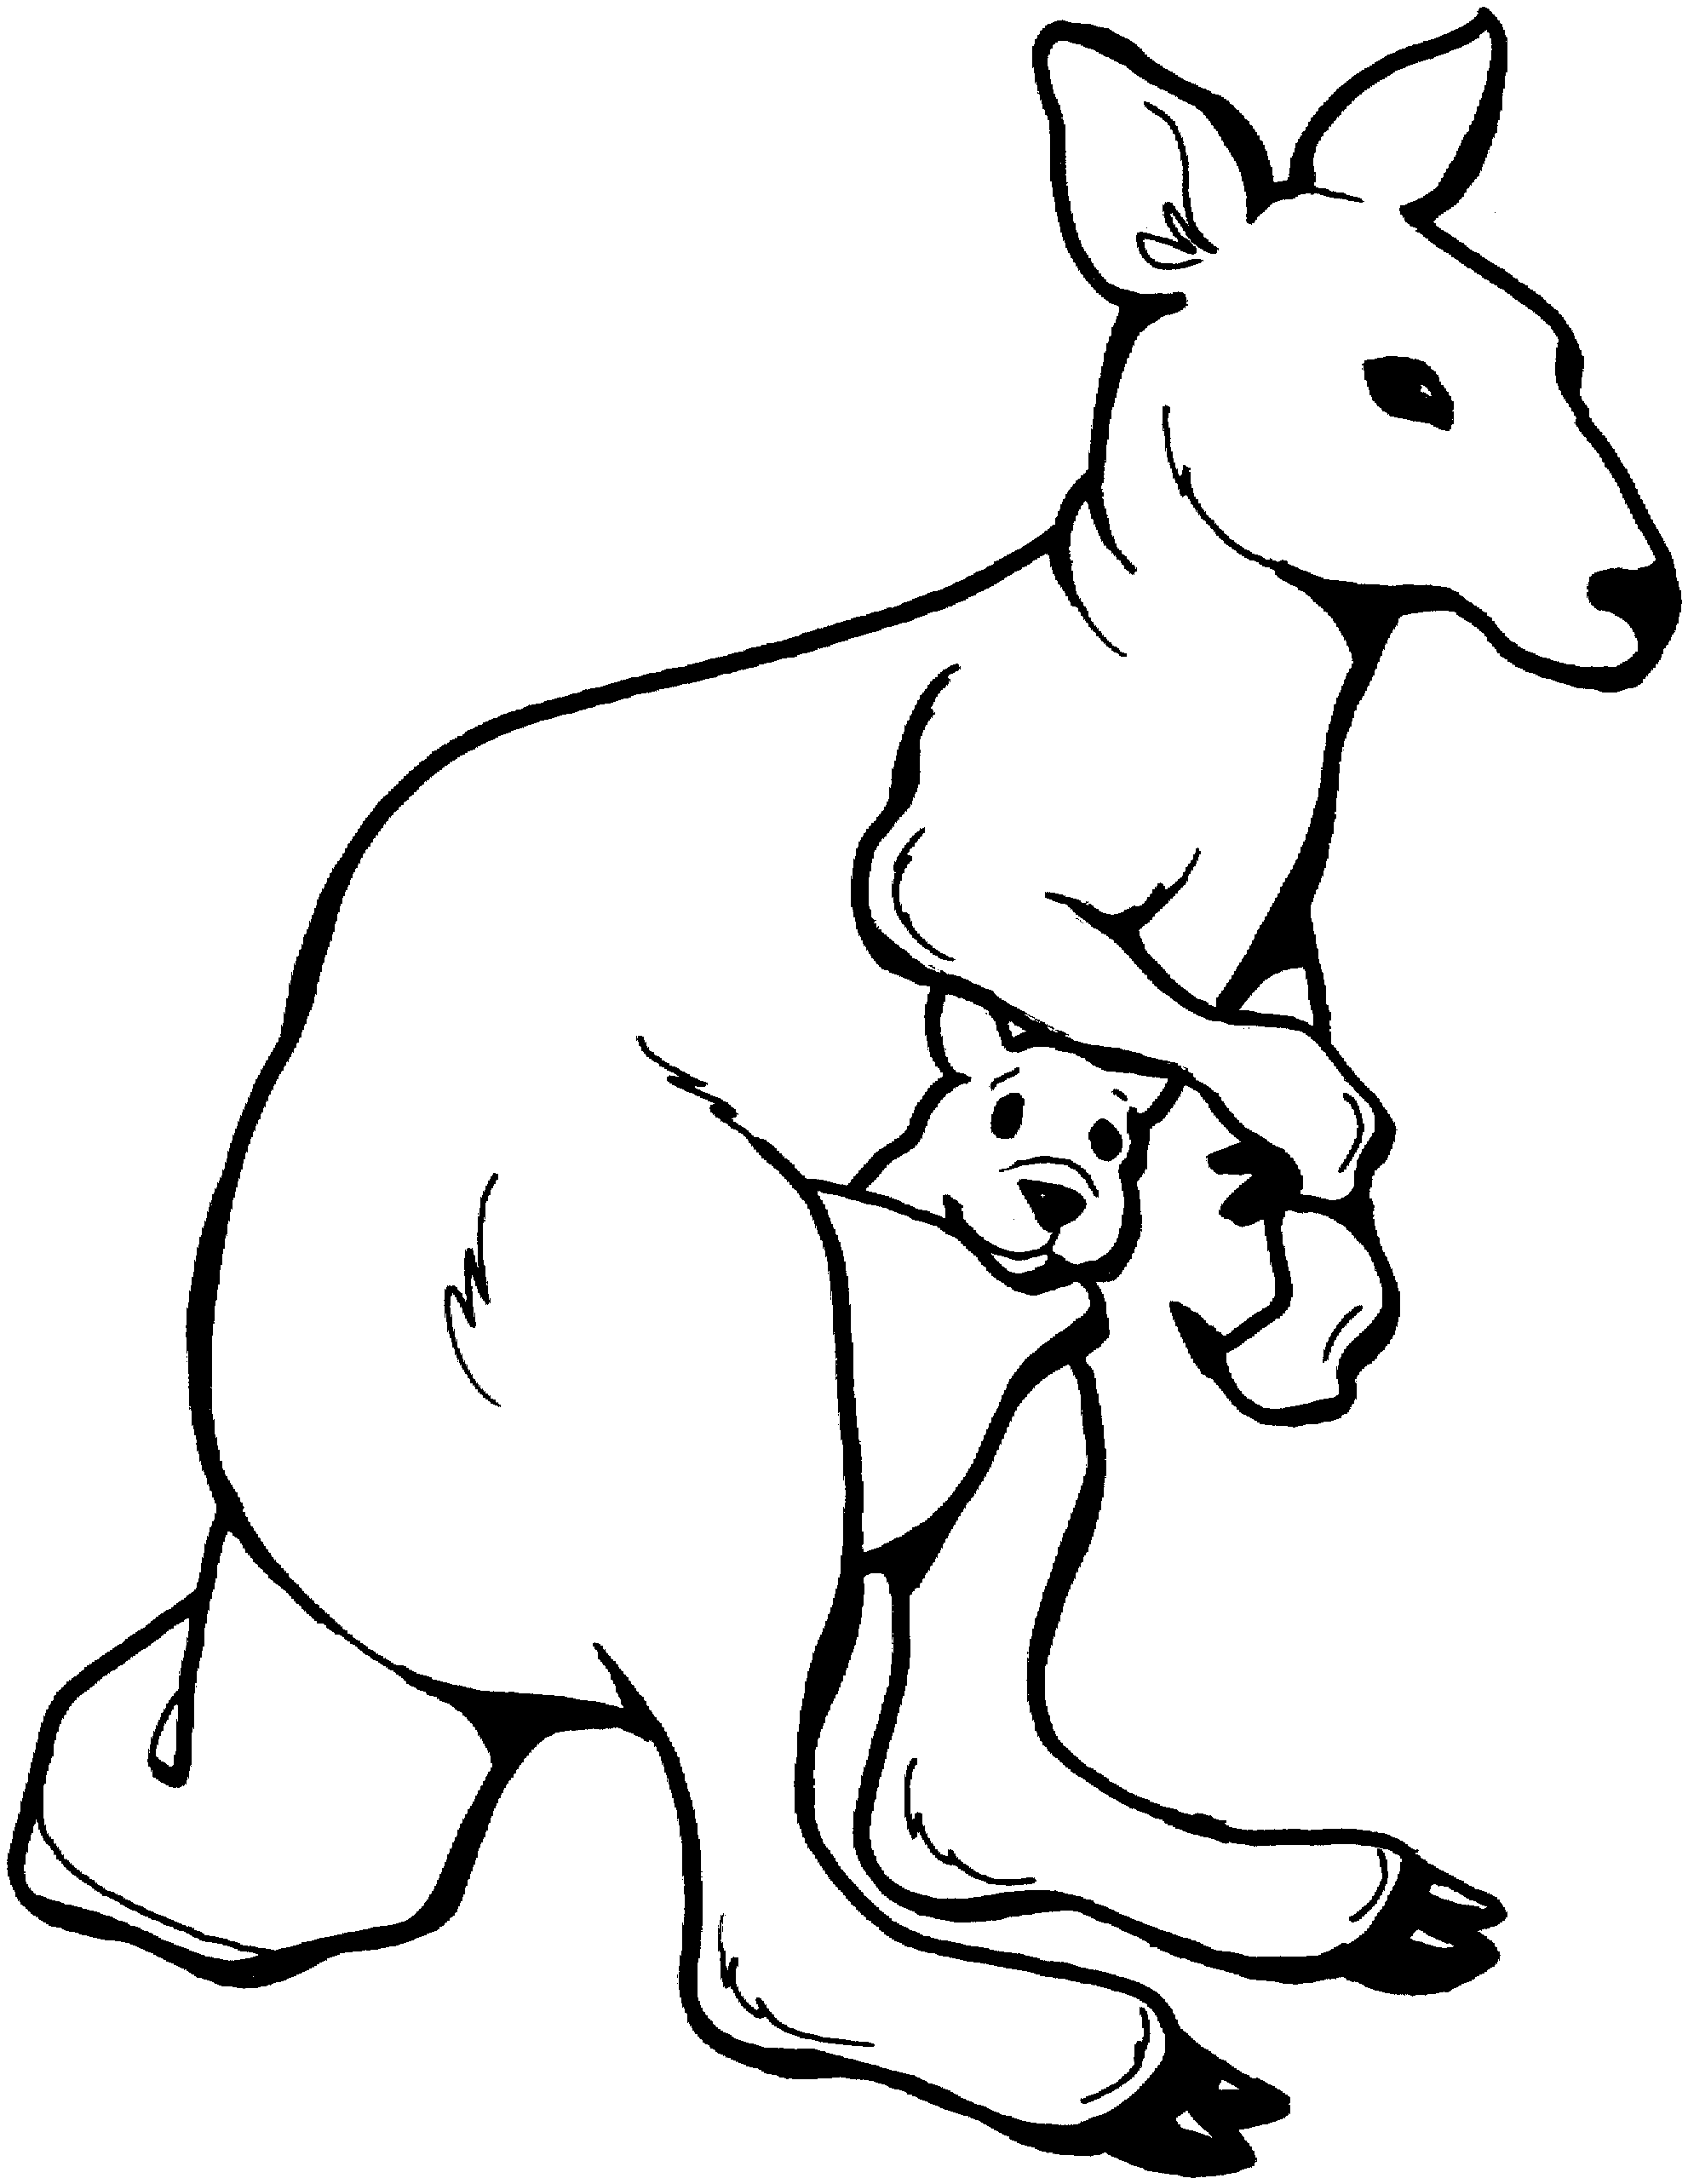 coloring-pages-kangaroo-animals-printable-coloring-pages